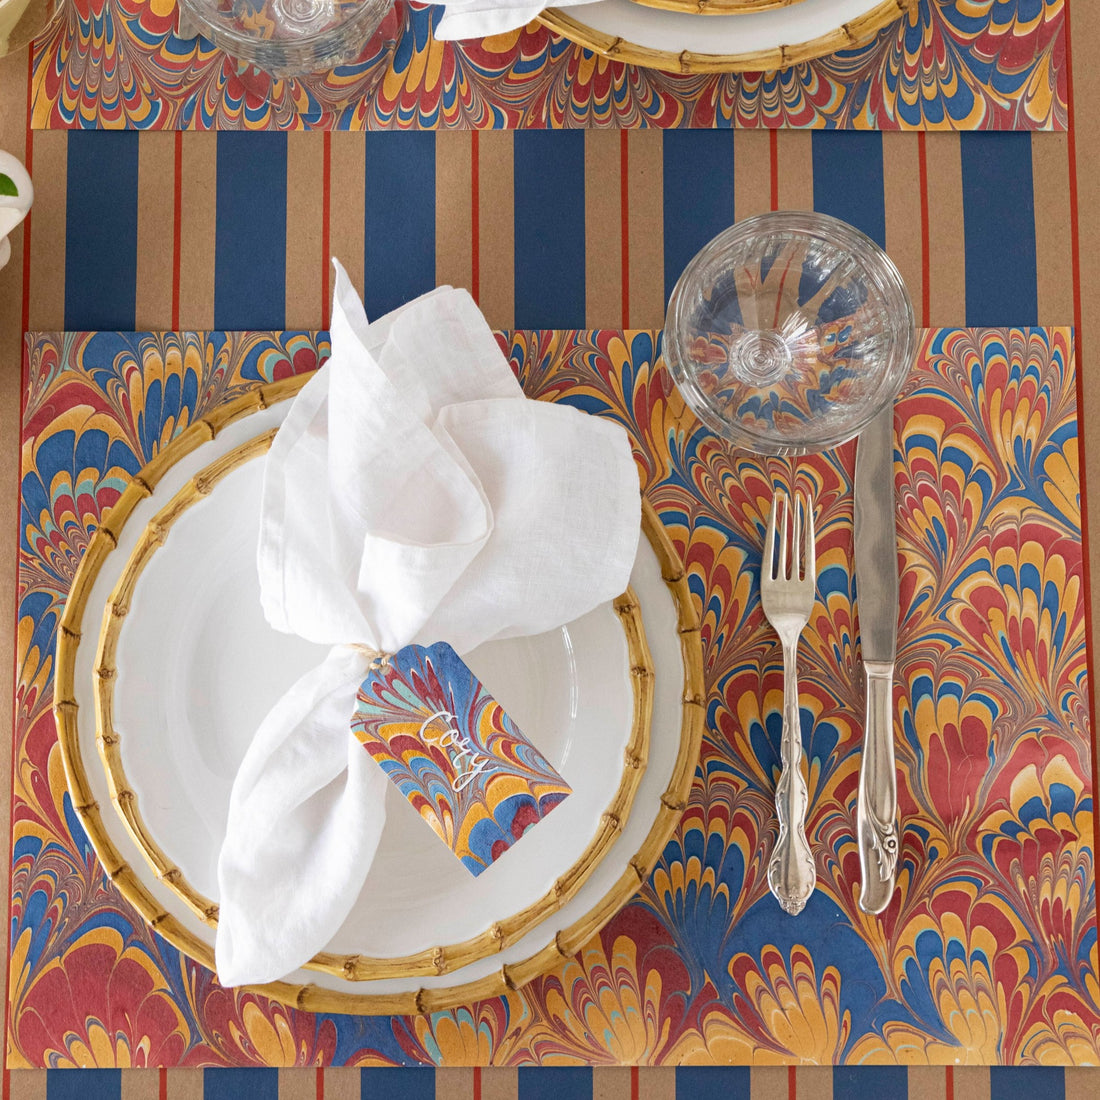 The Red &amp; Blue Peacock Marbled Placemat under an elegant place setting, from above.